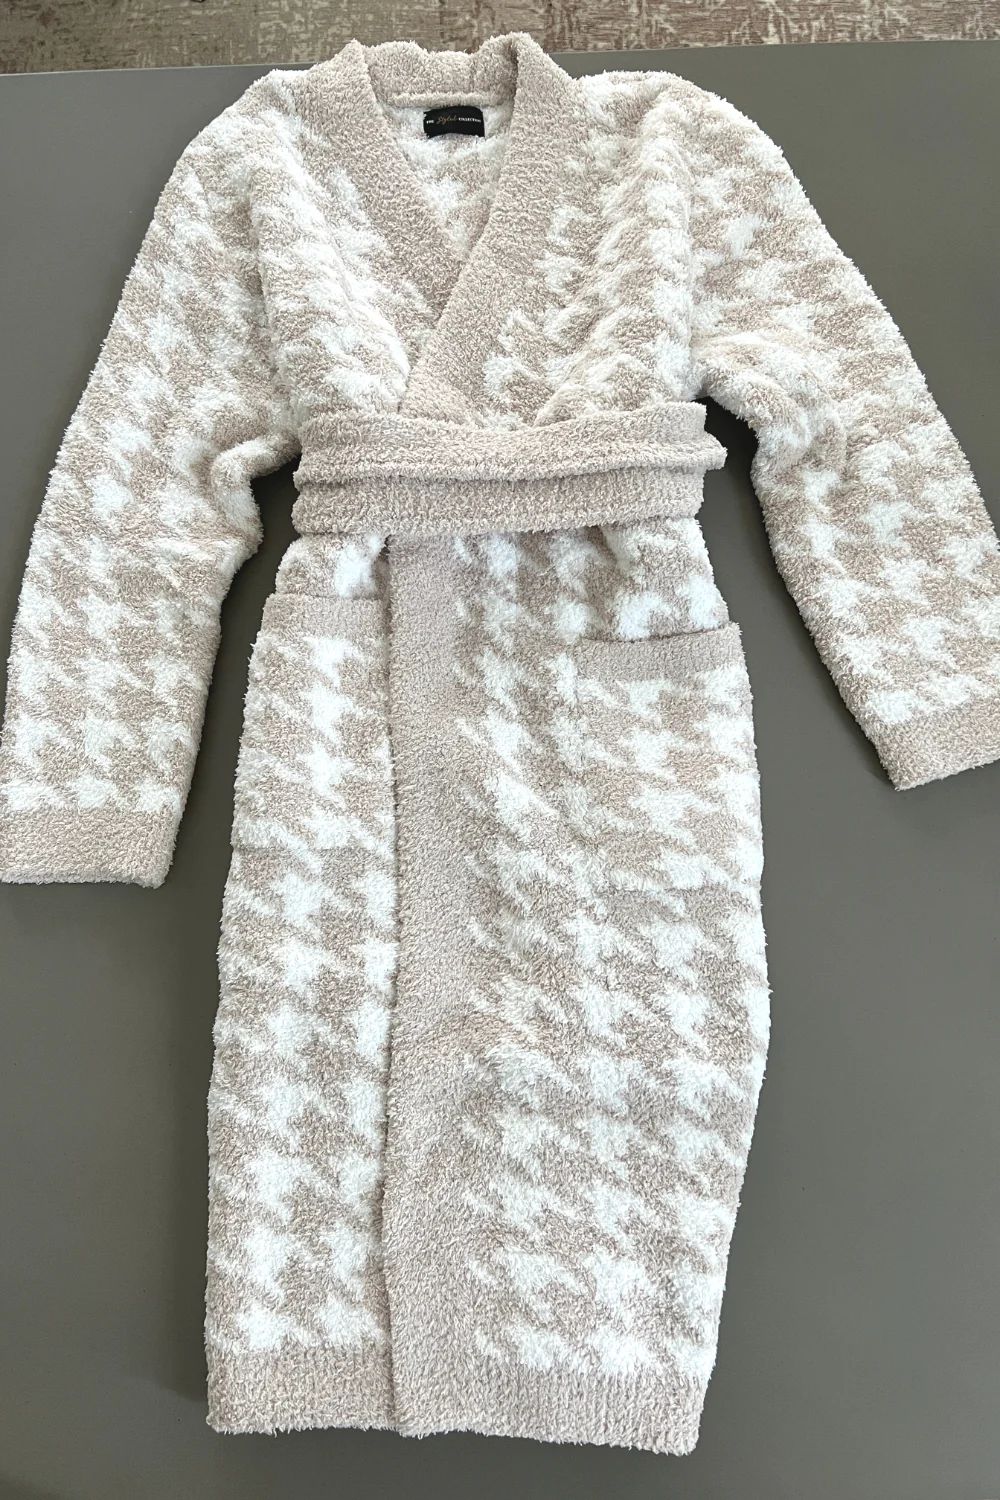 Houndstooth Buttery Robe- Pre Order 4-30 | The Styled Collection